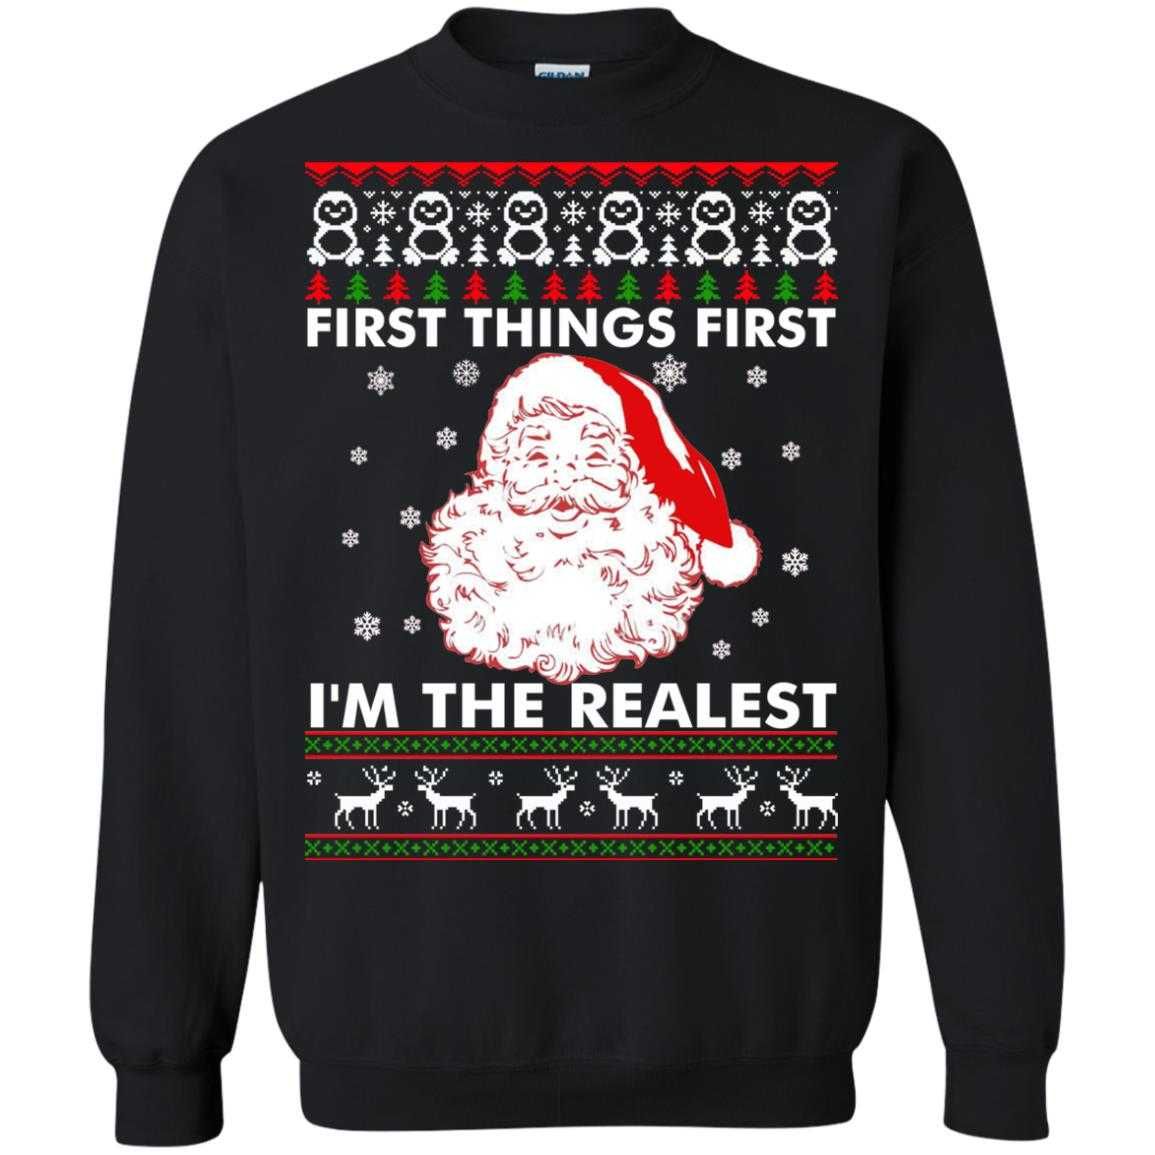 First Things First I'm The Realest Christmas Shirt Style: Sweatshirt, Color: Black